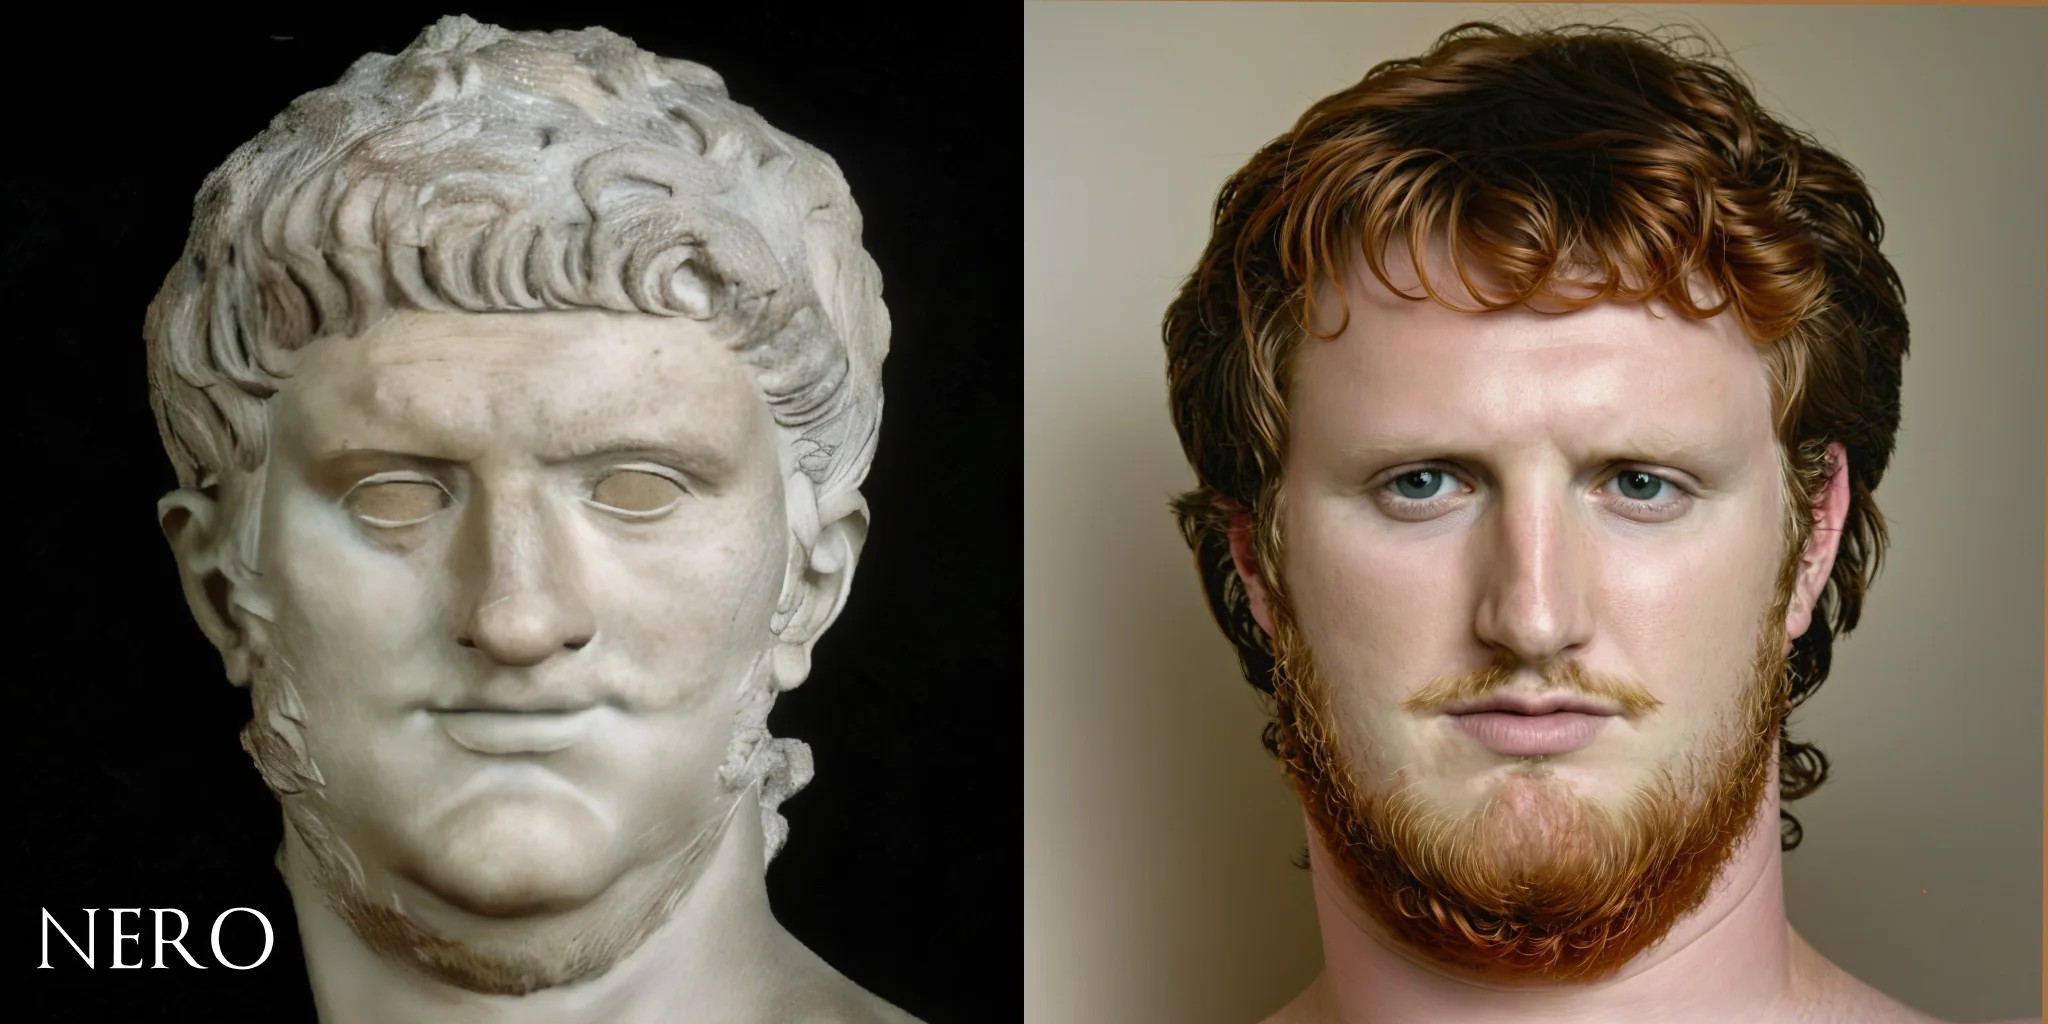 Roman busts brought to life